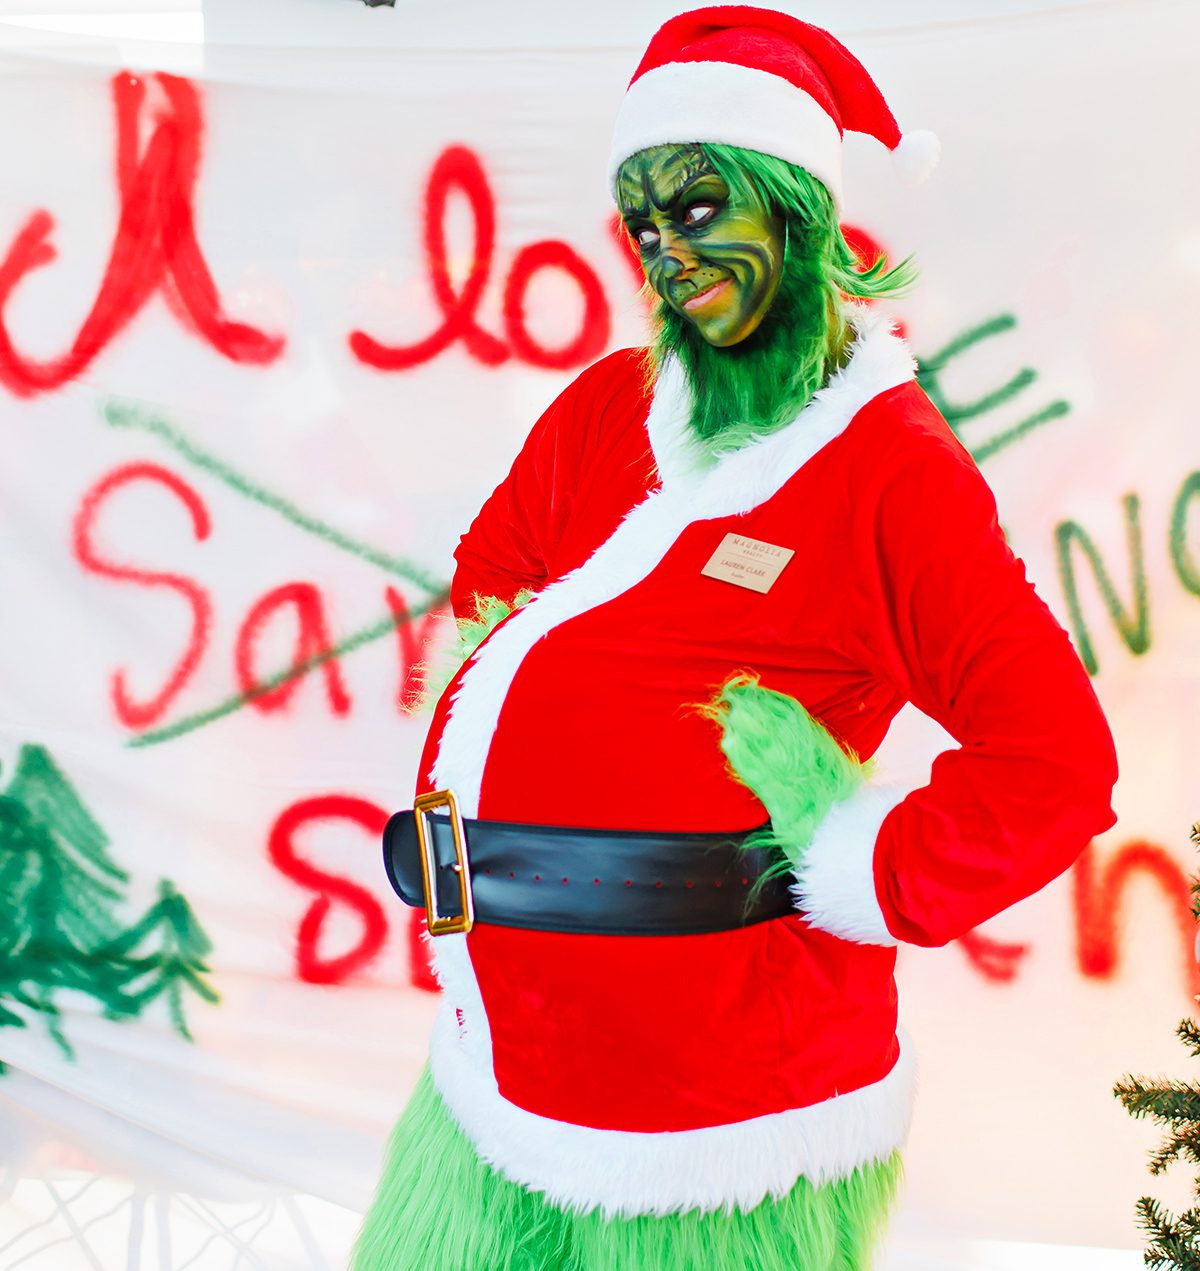 Lauren Clark with Magnolia Realty dressed up as the Grinch for Christmas on Mercer Street